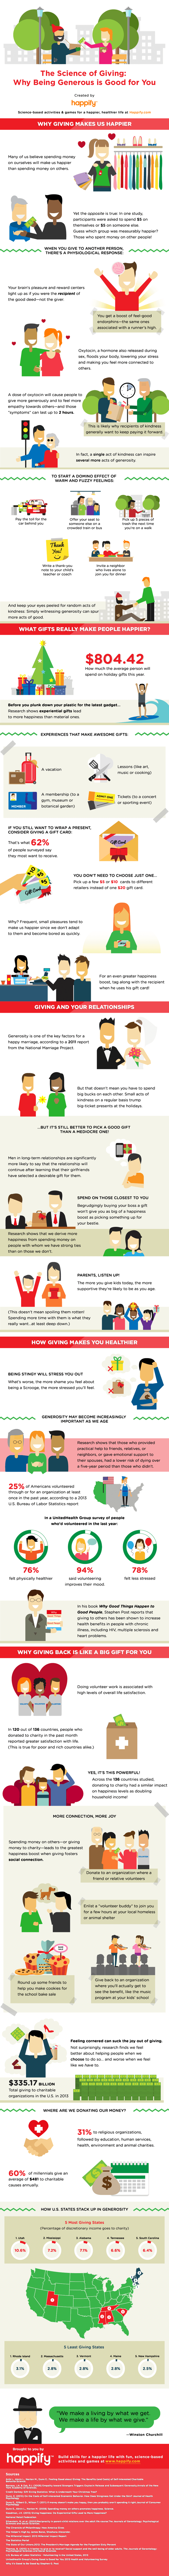 Giving-Happify